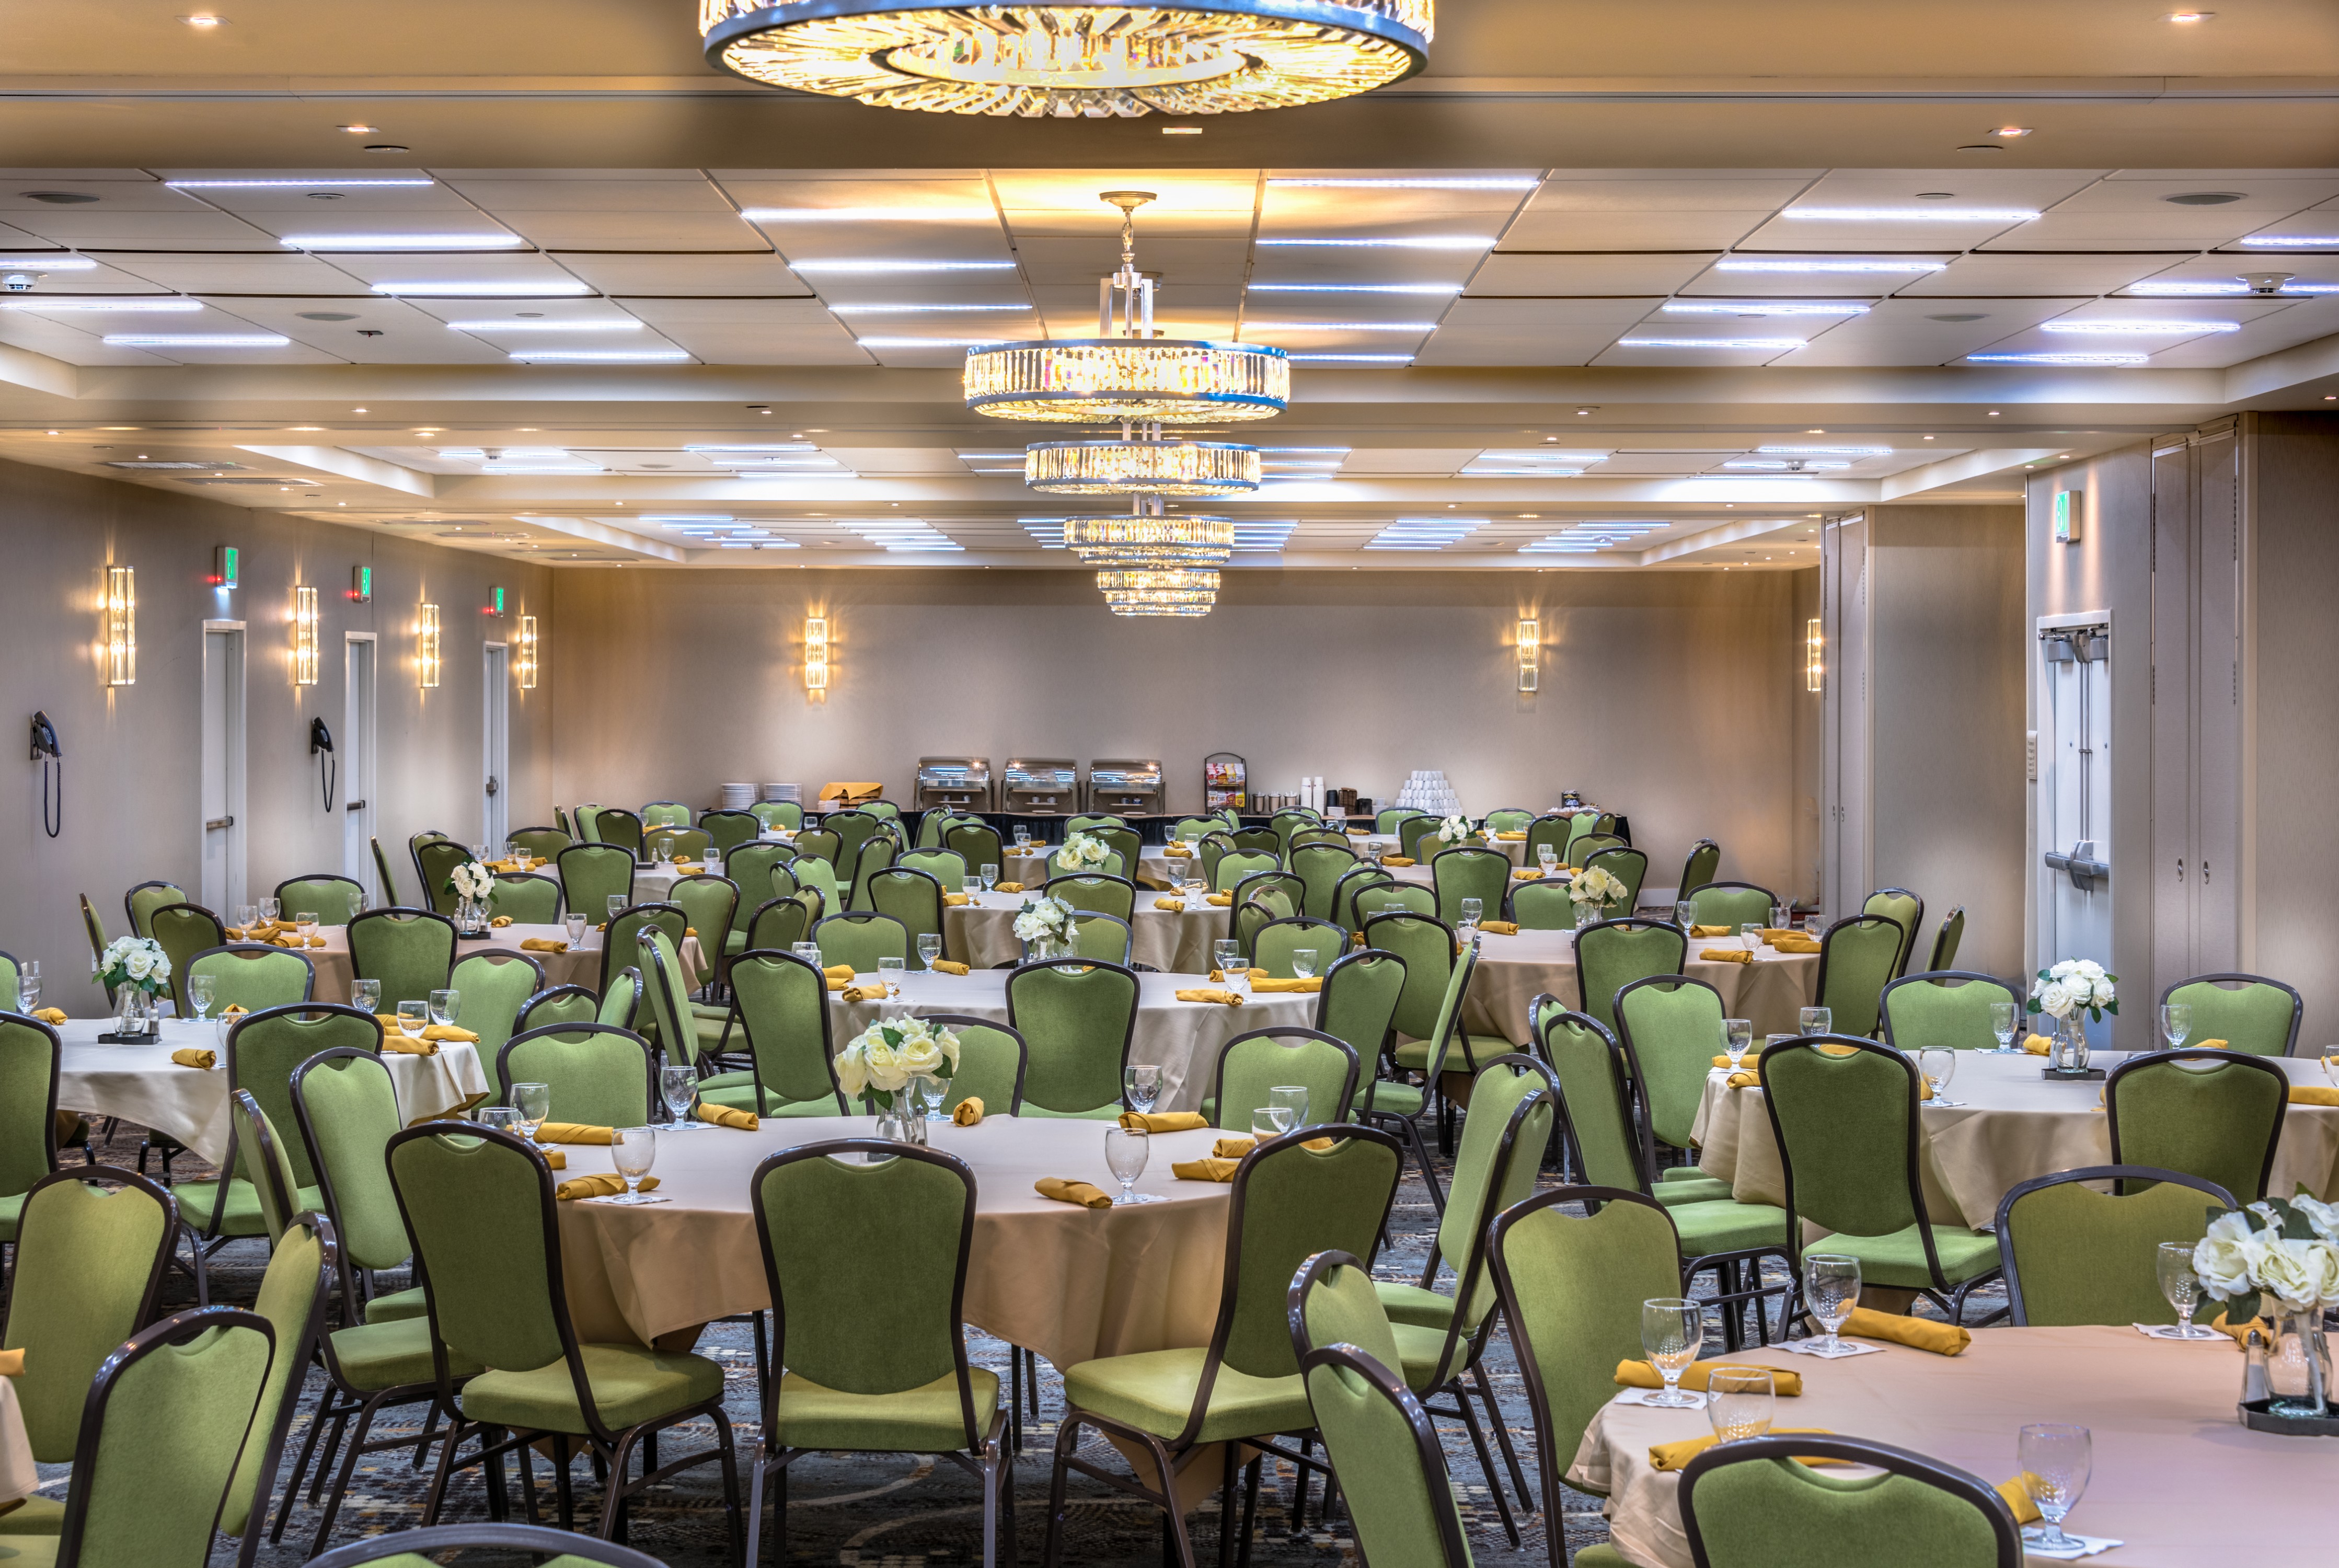 Ballroom Area with Roundtables and Chairs